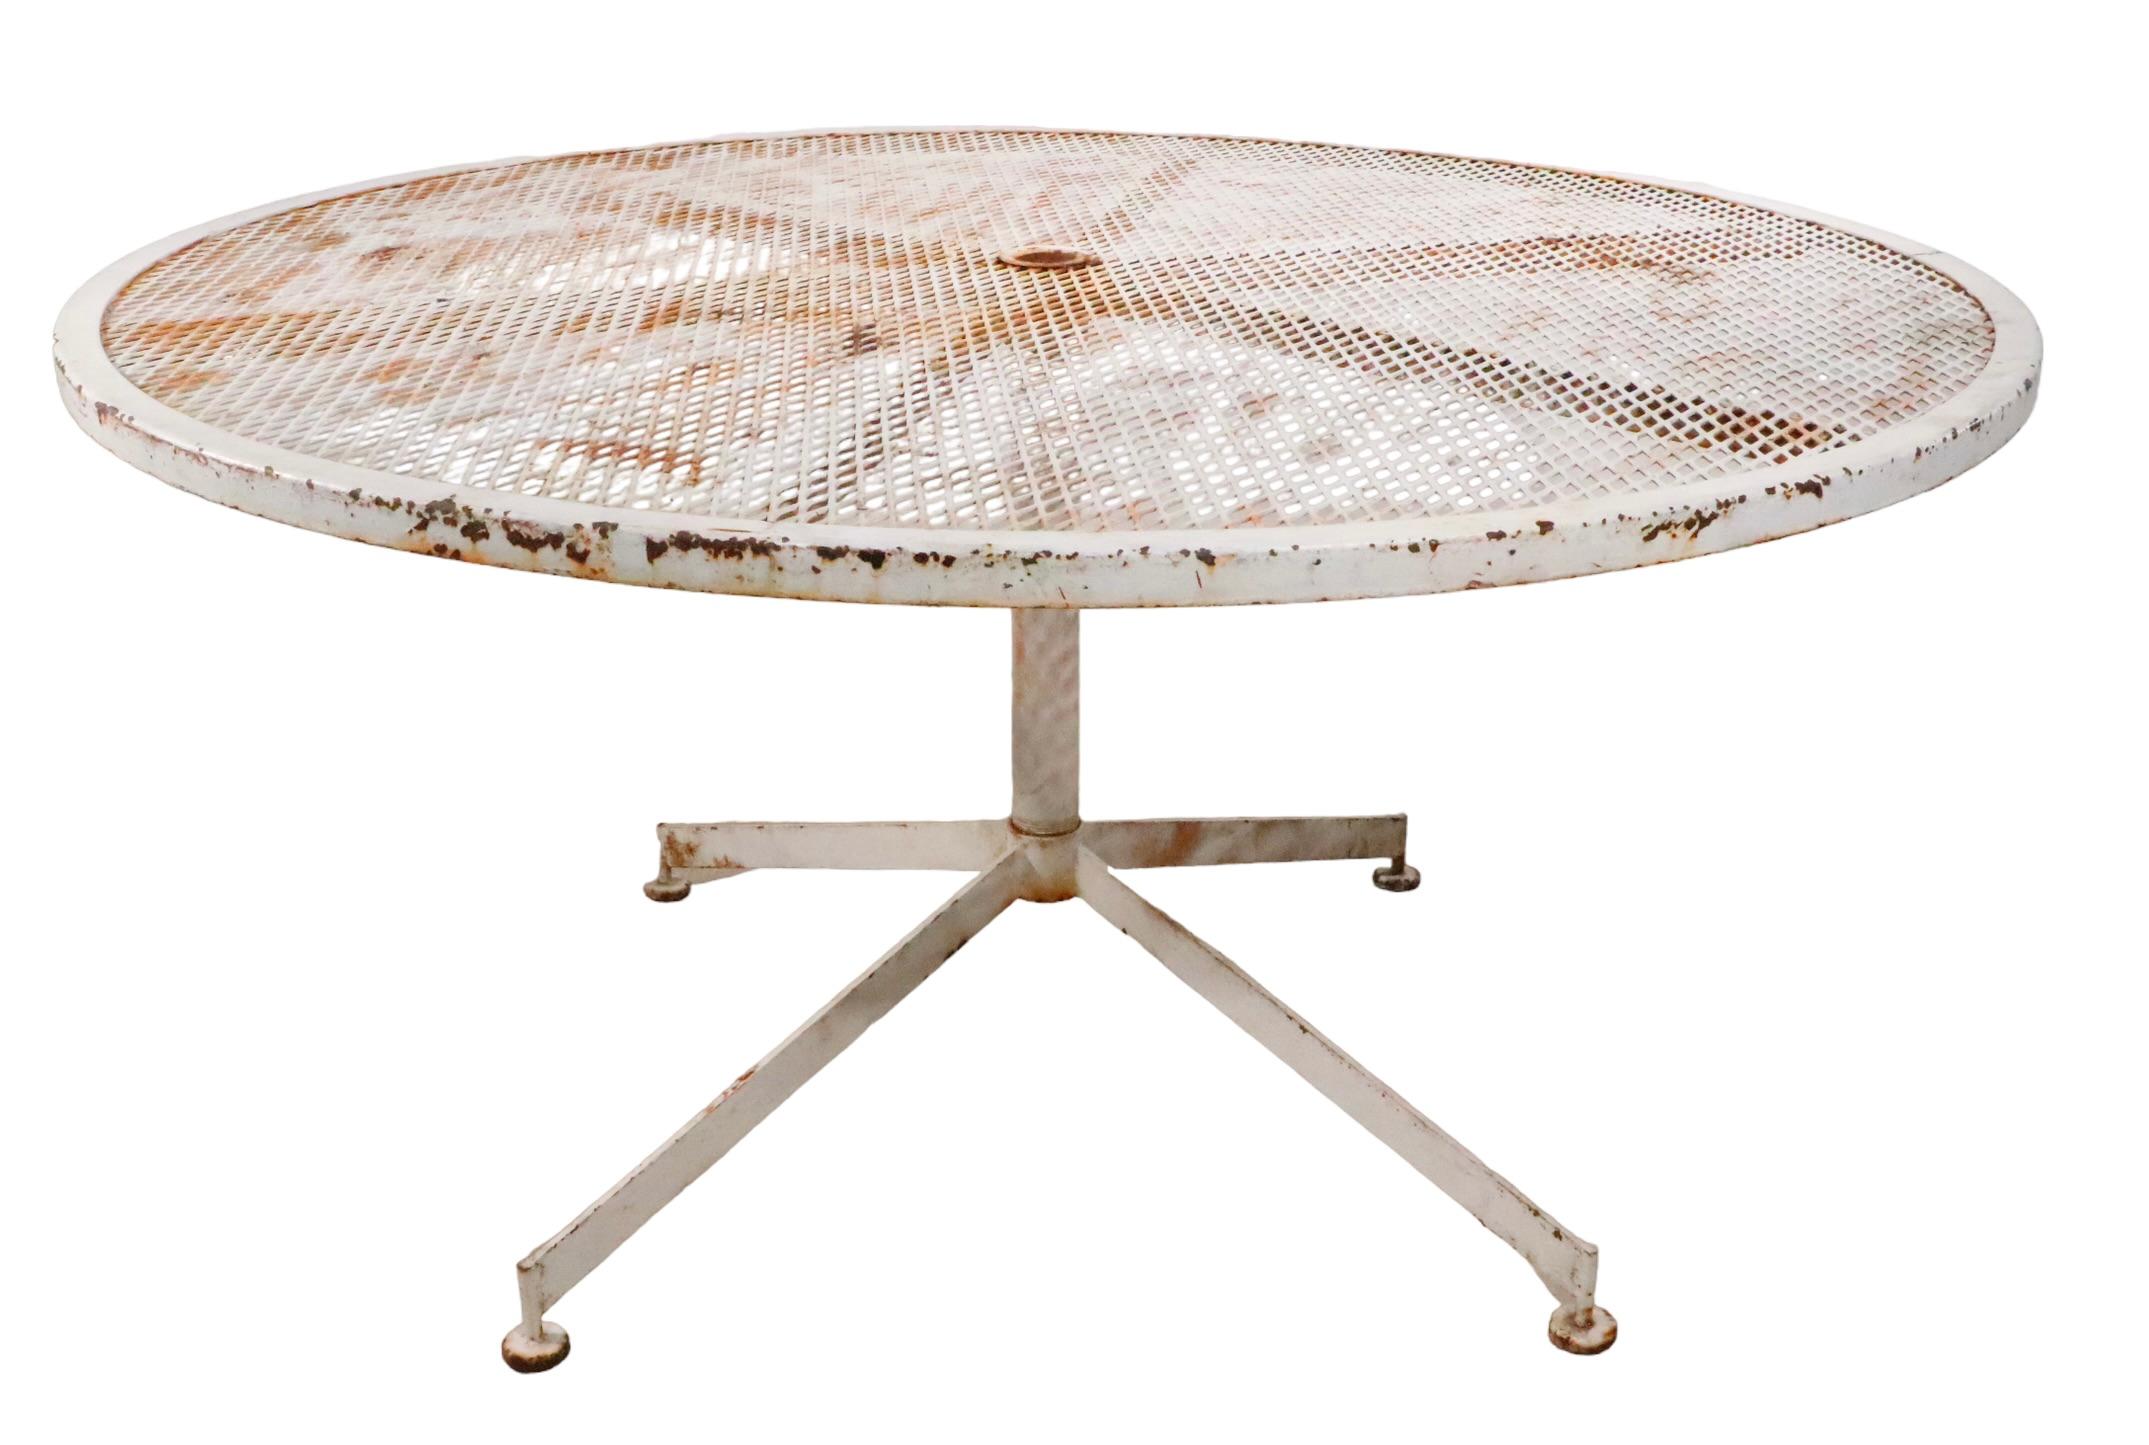 20th Century Mid Century Garden Patio Poolside Table Attributed to Woodard For Sale